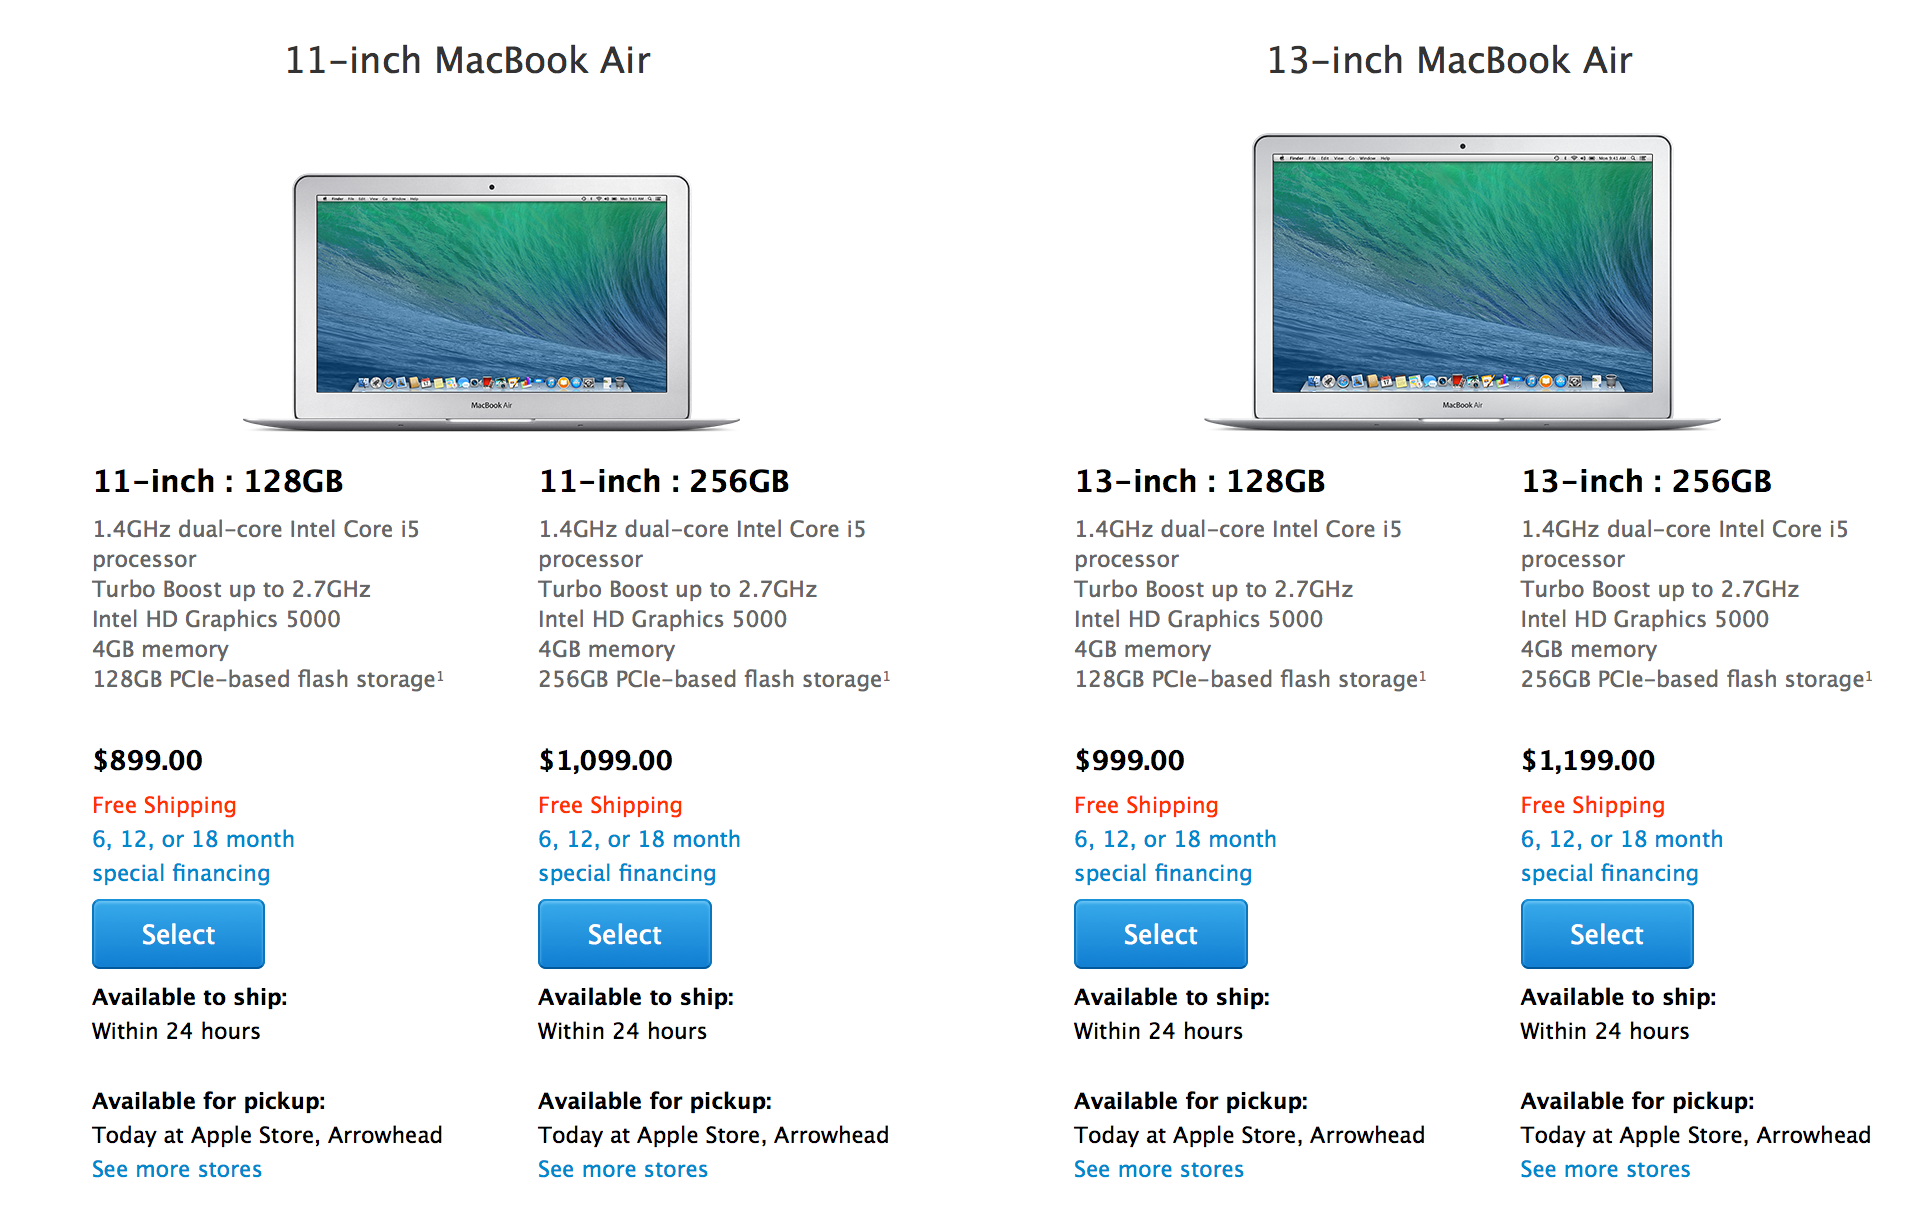 Apple's MacBook Air lineup updated with faster Haswell processors